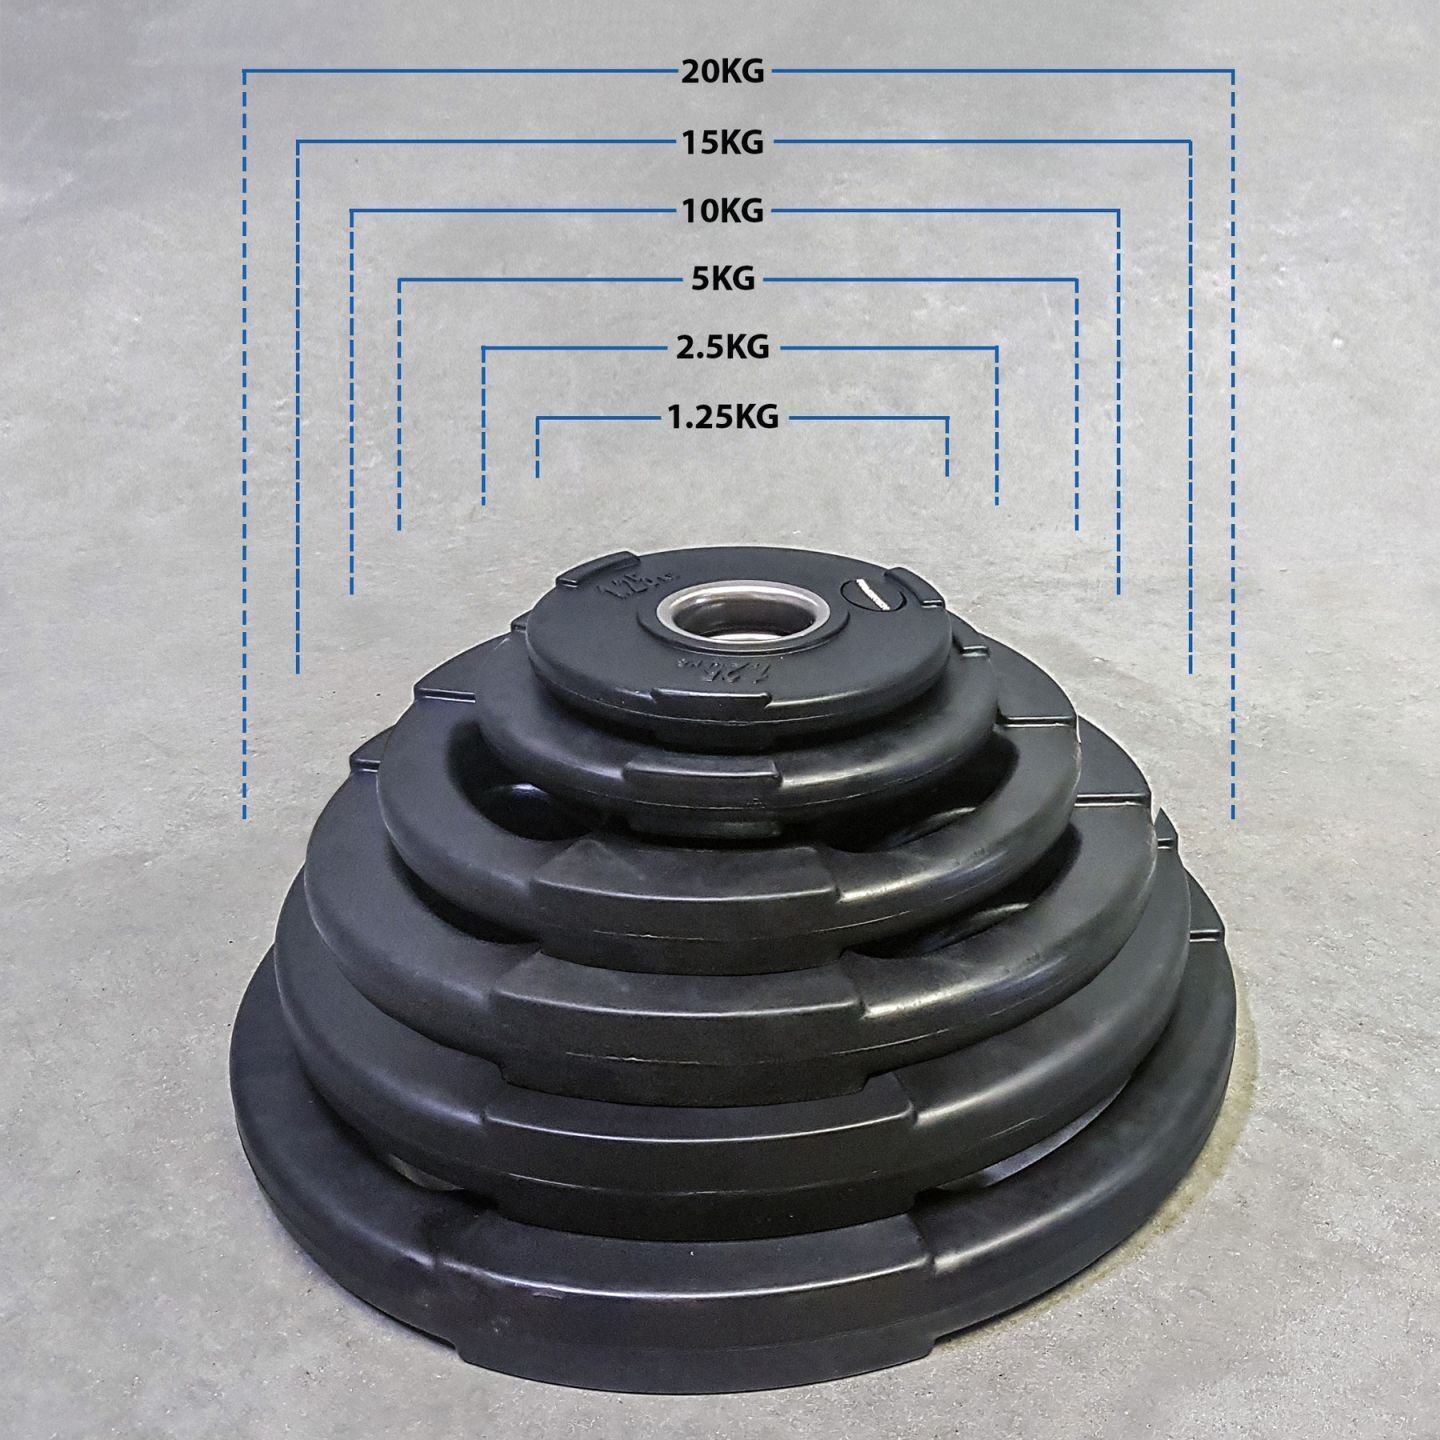 Olympic Tri Grip Rubber Weight Plate [Weight: 2.5kg]